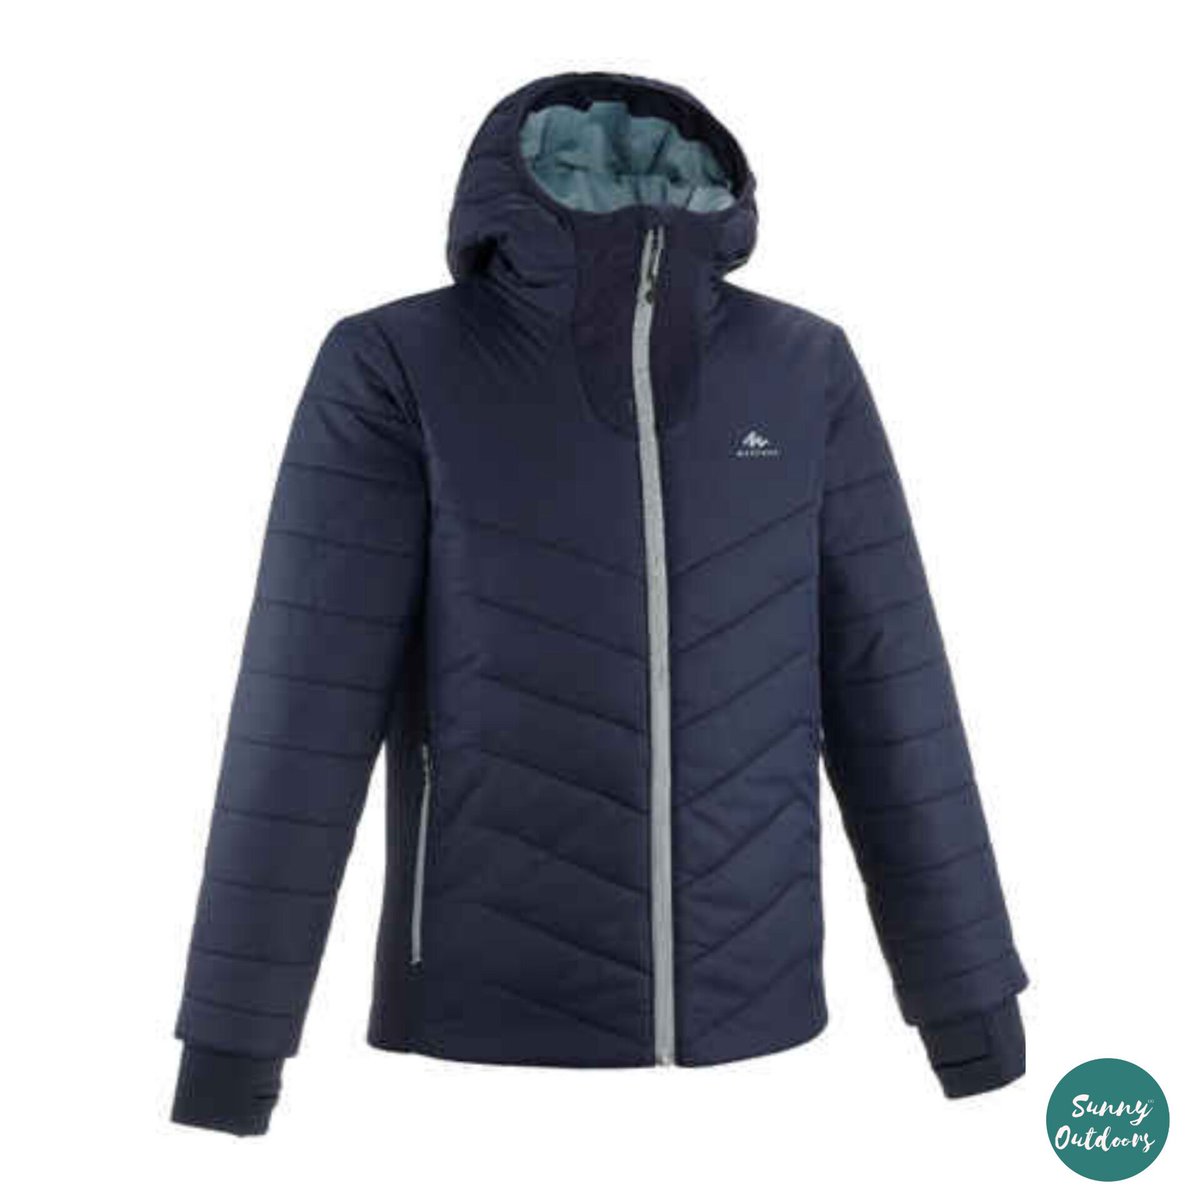 This padded jacket is perfect for young hikers, offering warmth with its recycled wadding insulation while also being water repellent to protect from light rain. Its breathable fabric ensures comfort during activities, and its lightweight design adds to the convenience for…